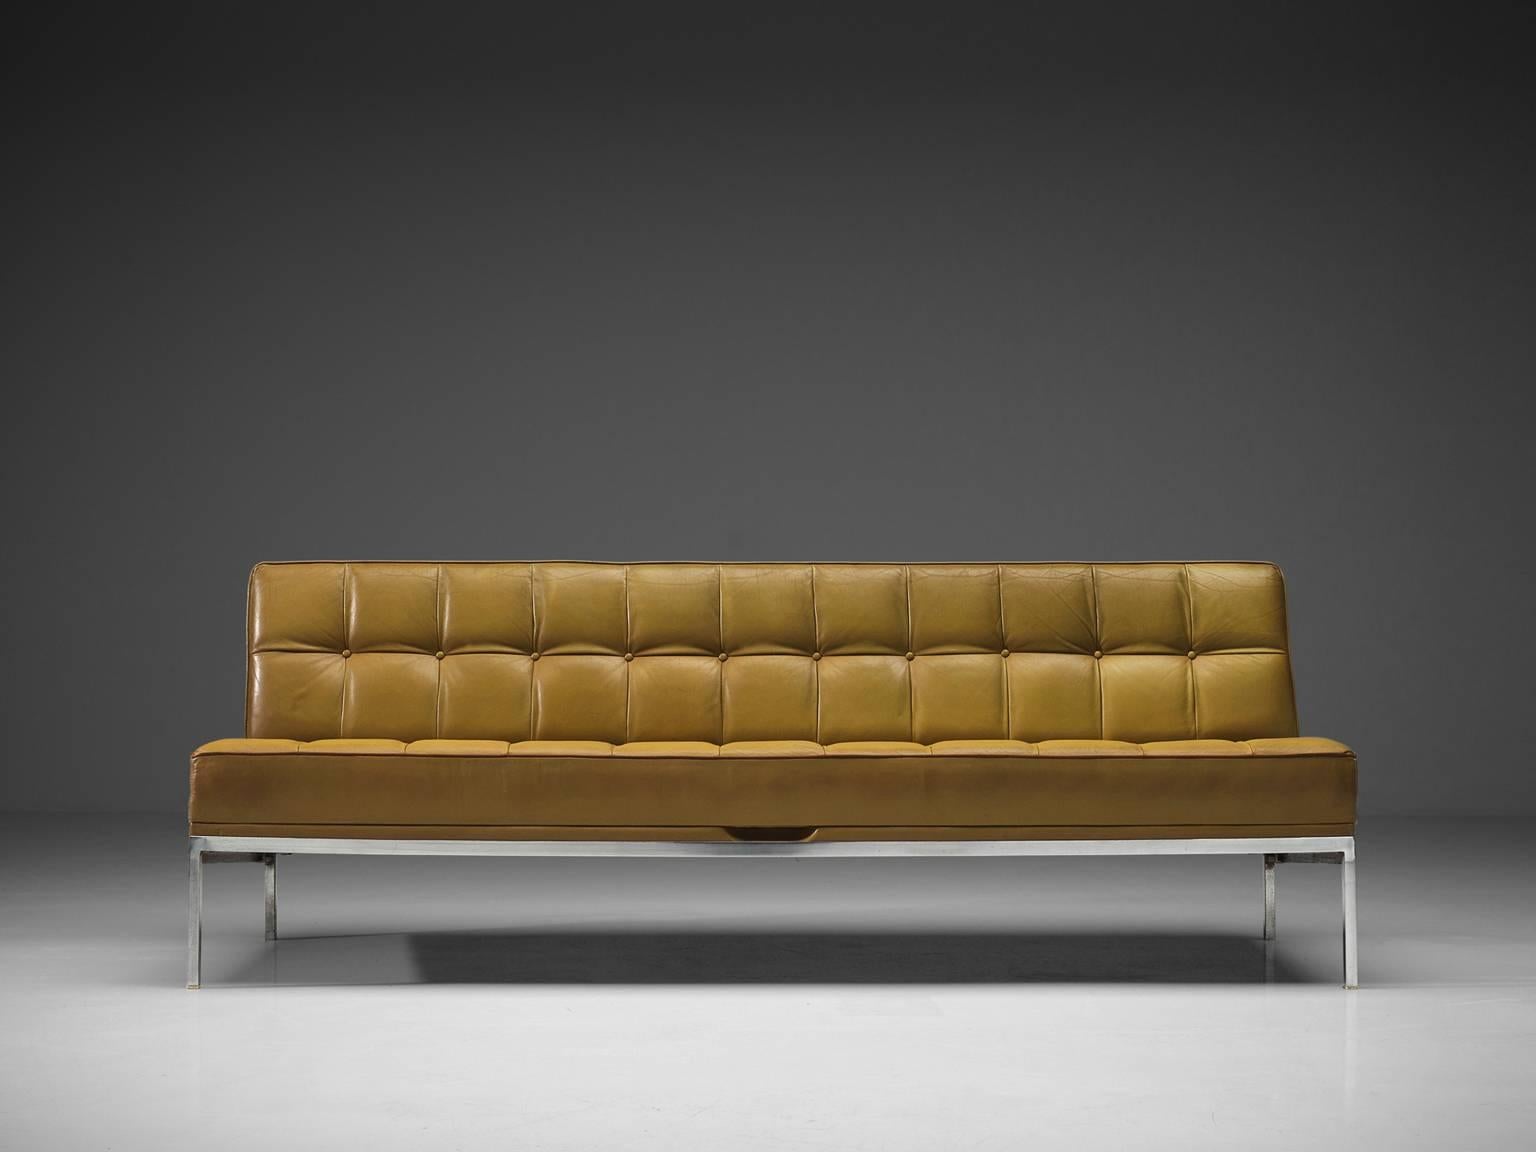 Johannes Spalt for Wittmann, 'Constanze' cognac green leather, steel, Austria, 1960s. 

This Austrian daybed named 'Constanze' is typical for Mid-Century Modern design. The tufted leather seat and back is constructed with the slick and clean metal